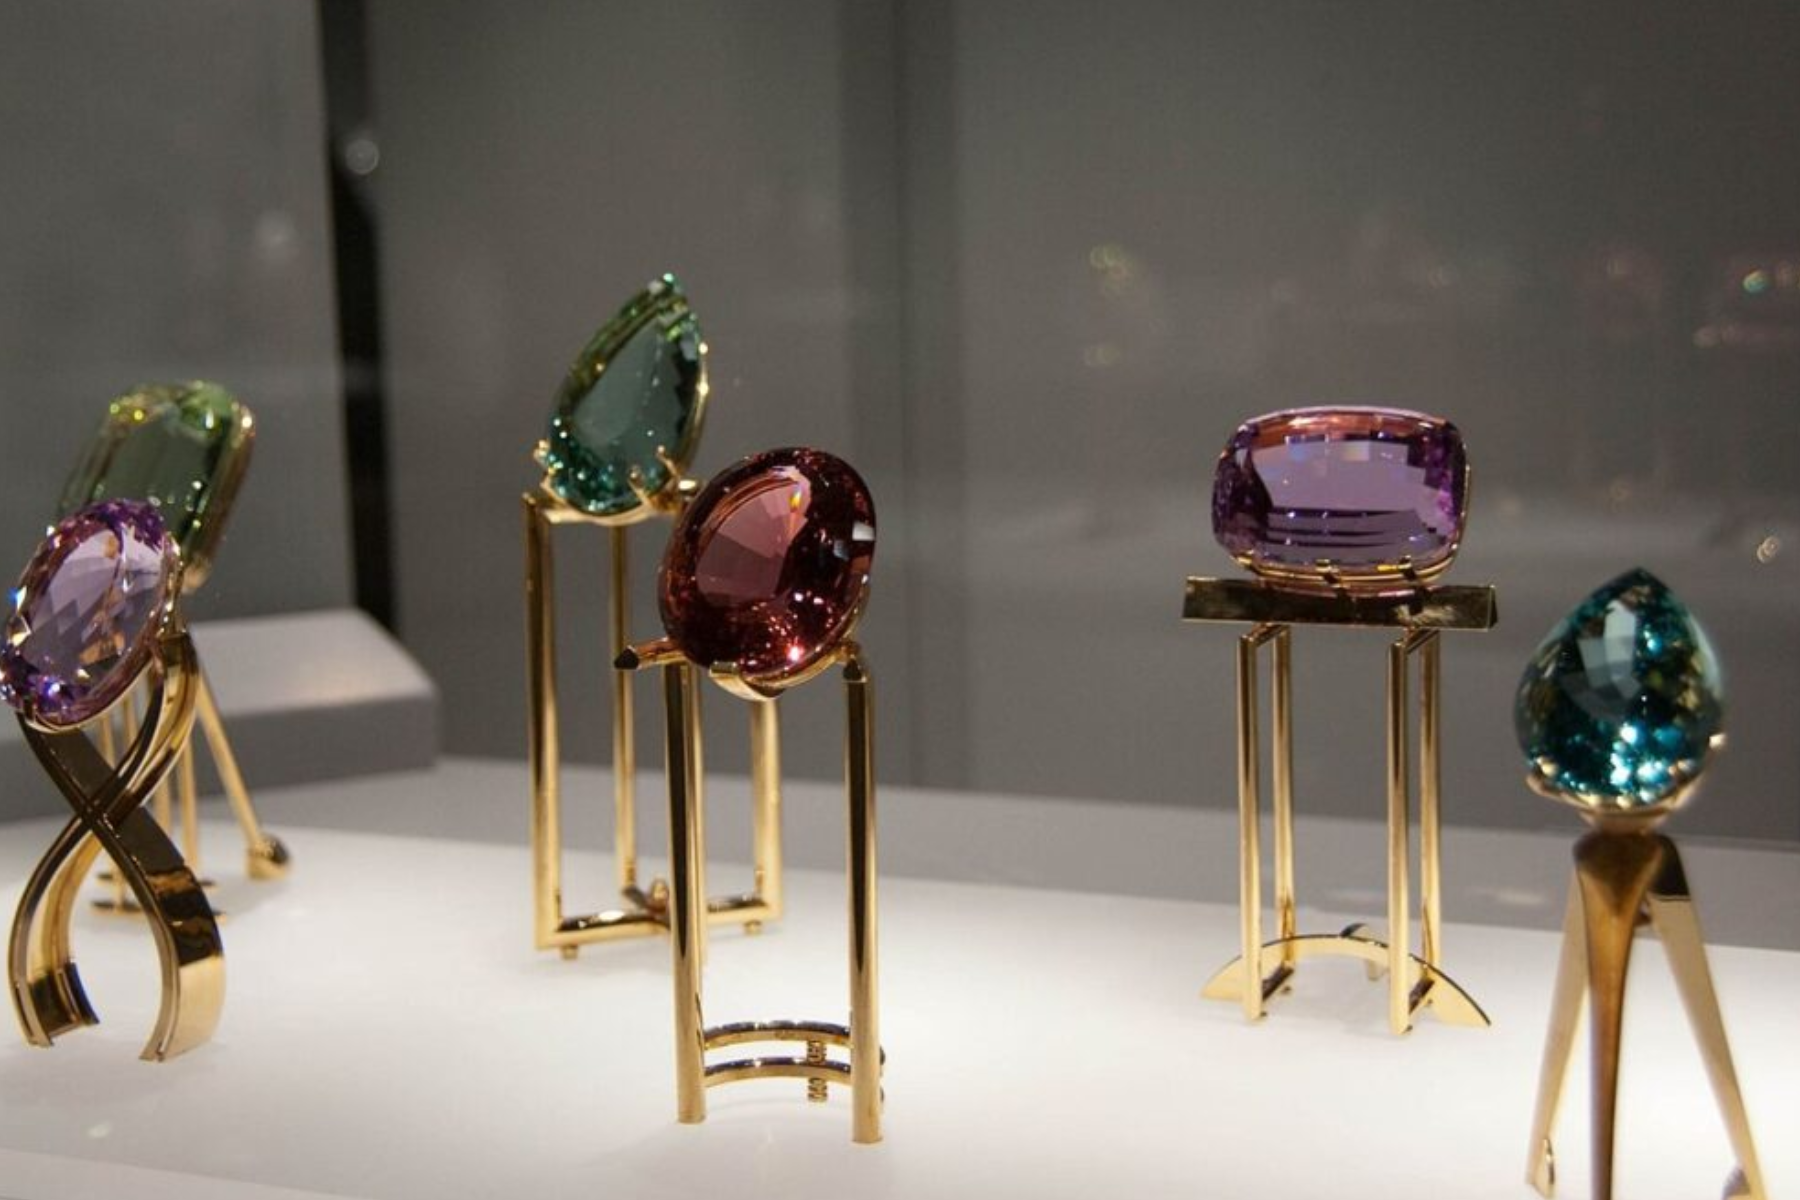 In a glass box, six birthstones are displayed